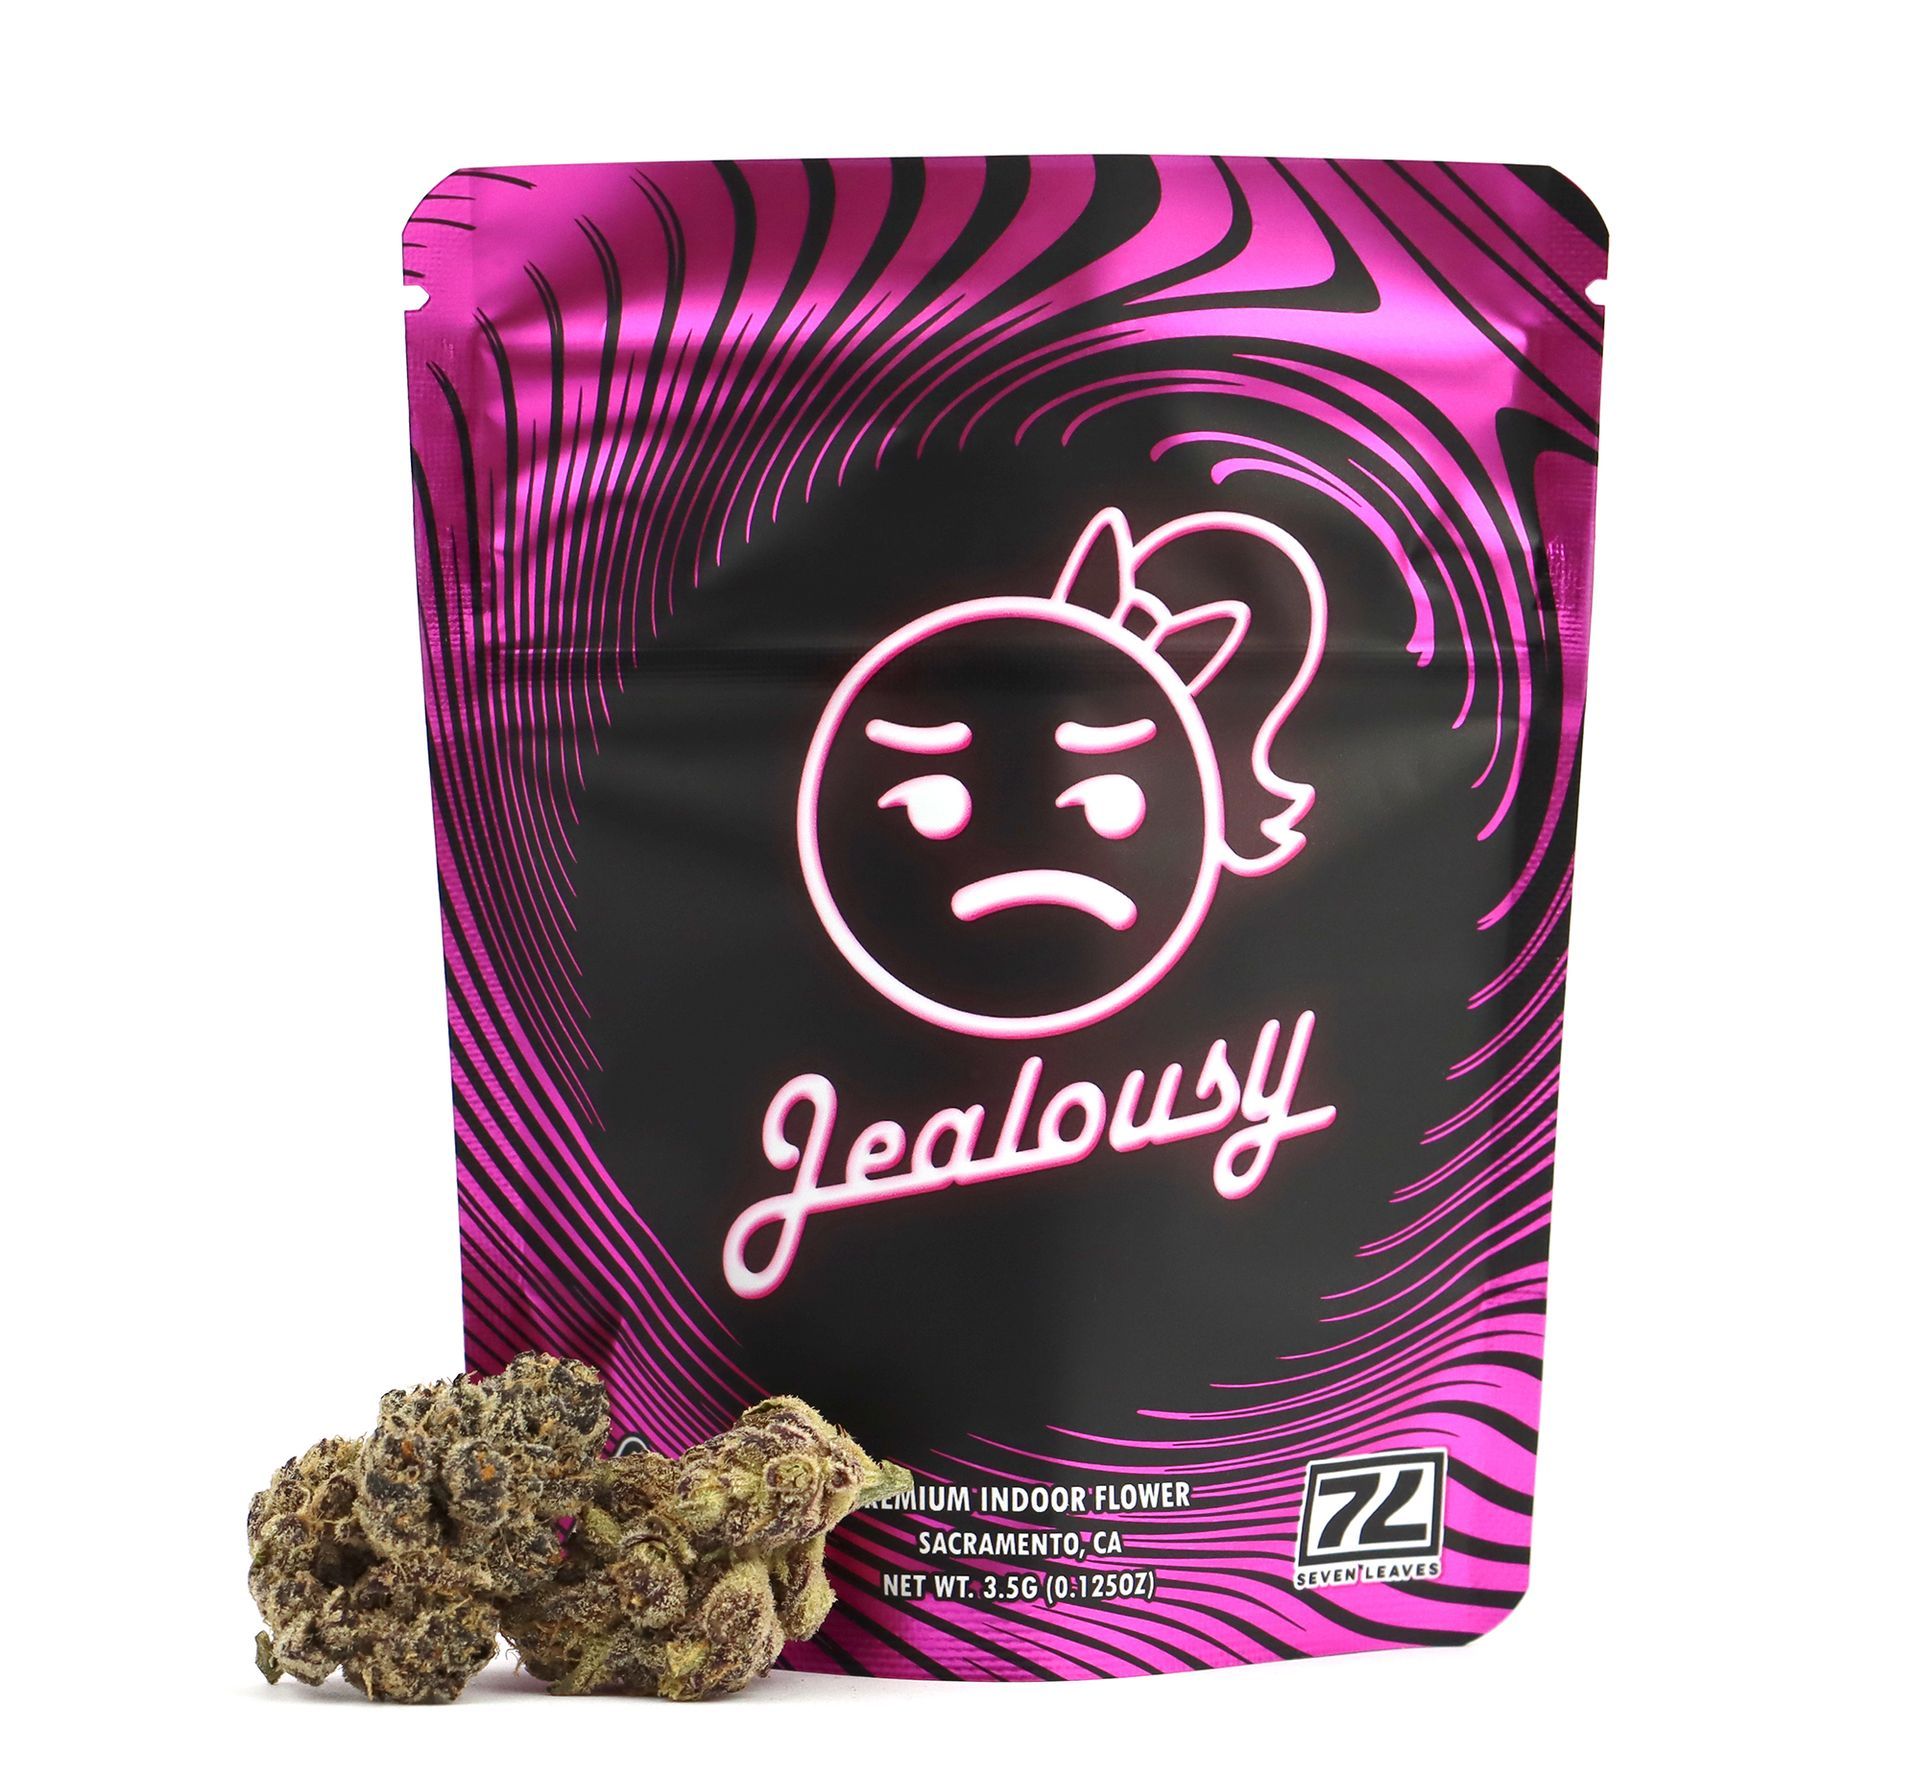 packaging spread of jealousy with weed next to it